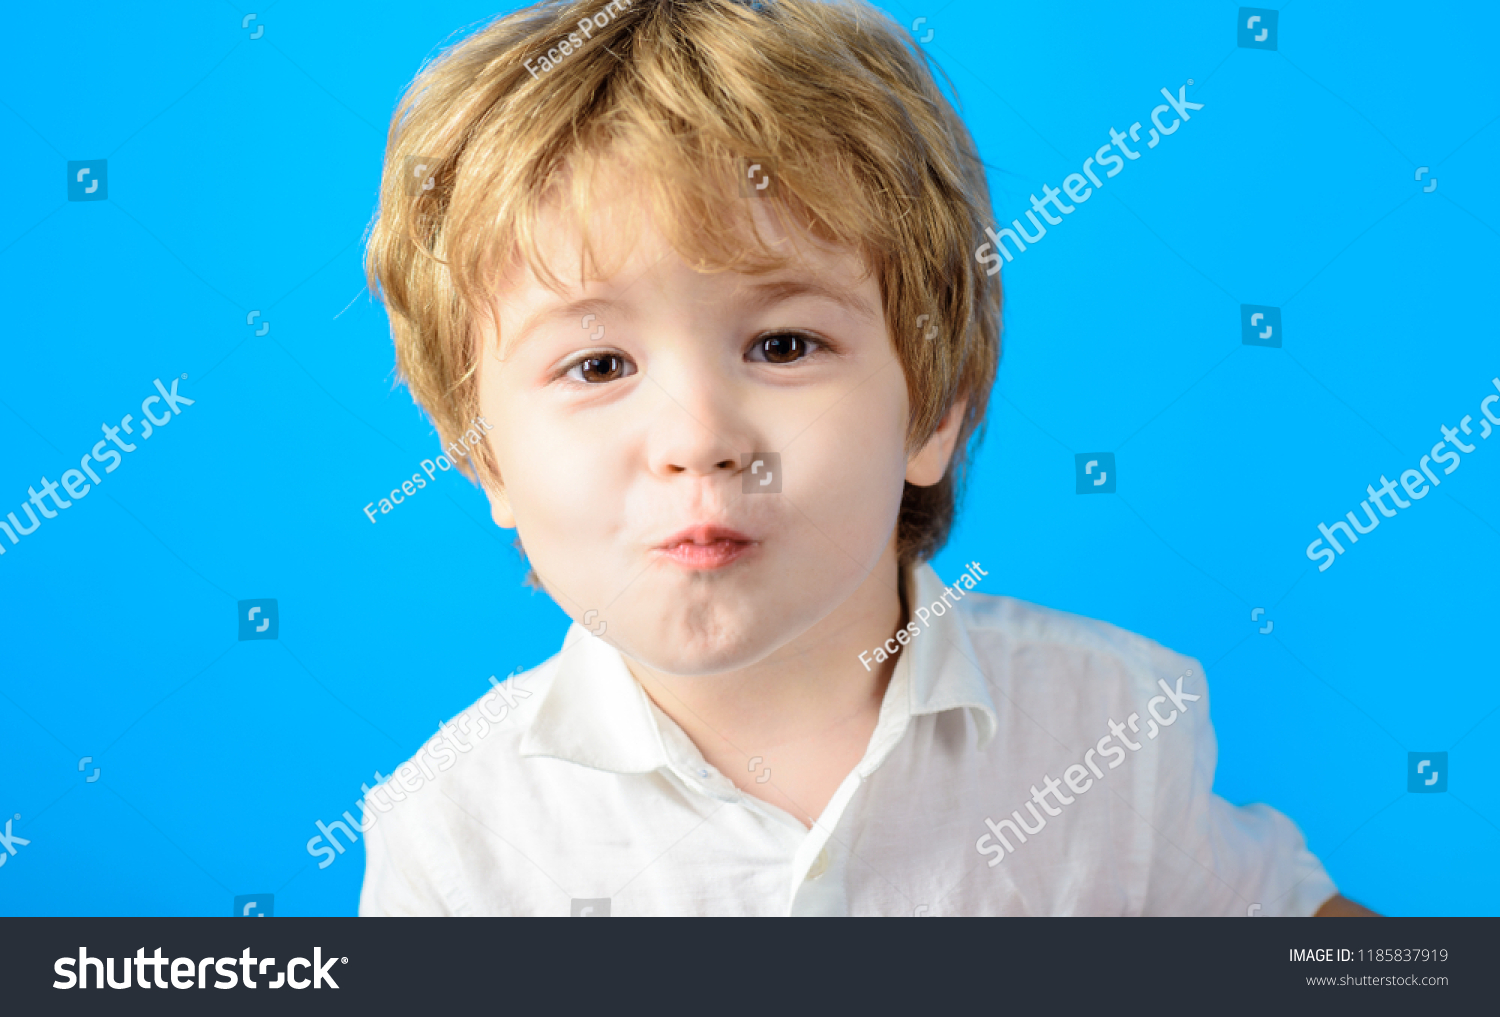 Kiss. Kissing. Cute little boy throwing kiss. Kissing child expressing love and affection. Emotions, sympathy, love, care. Adorable kid showing kiss to parent. Facial expressions. Ready to be kissed. #1185837919